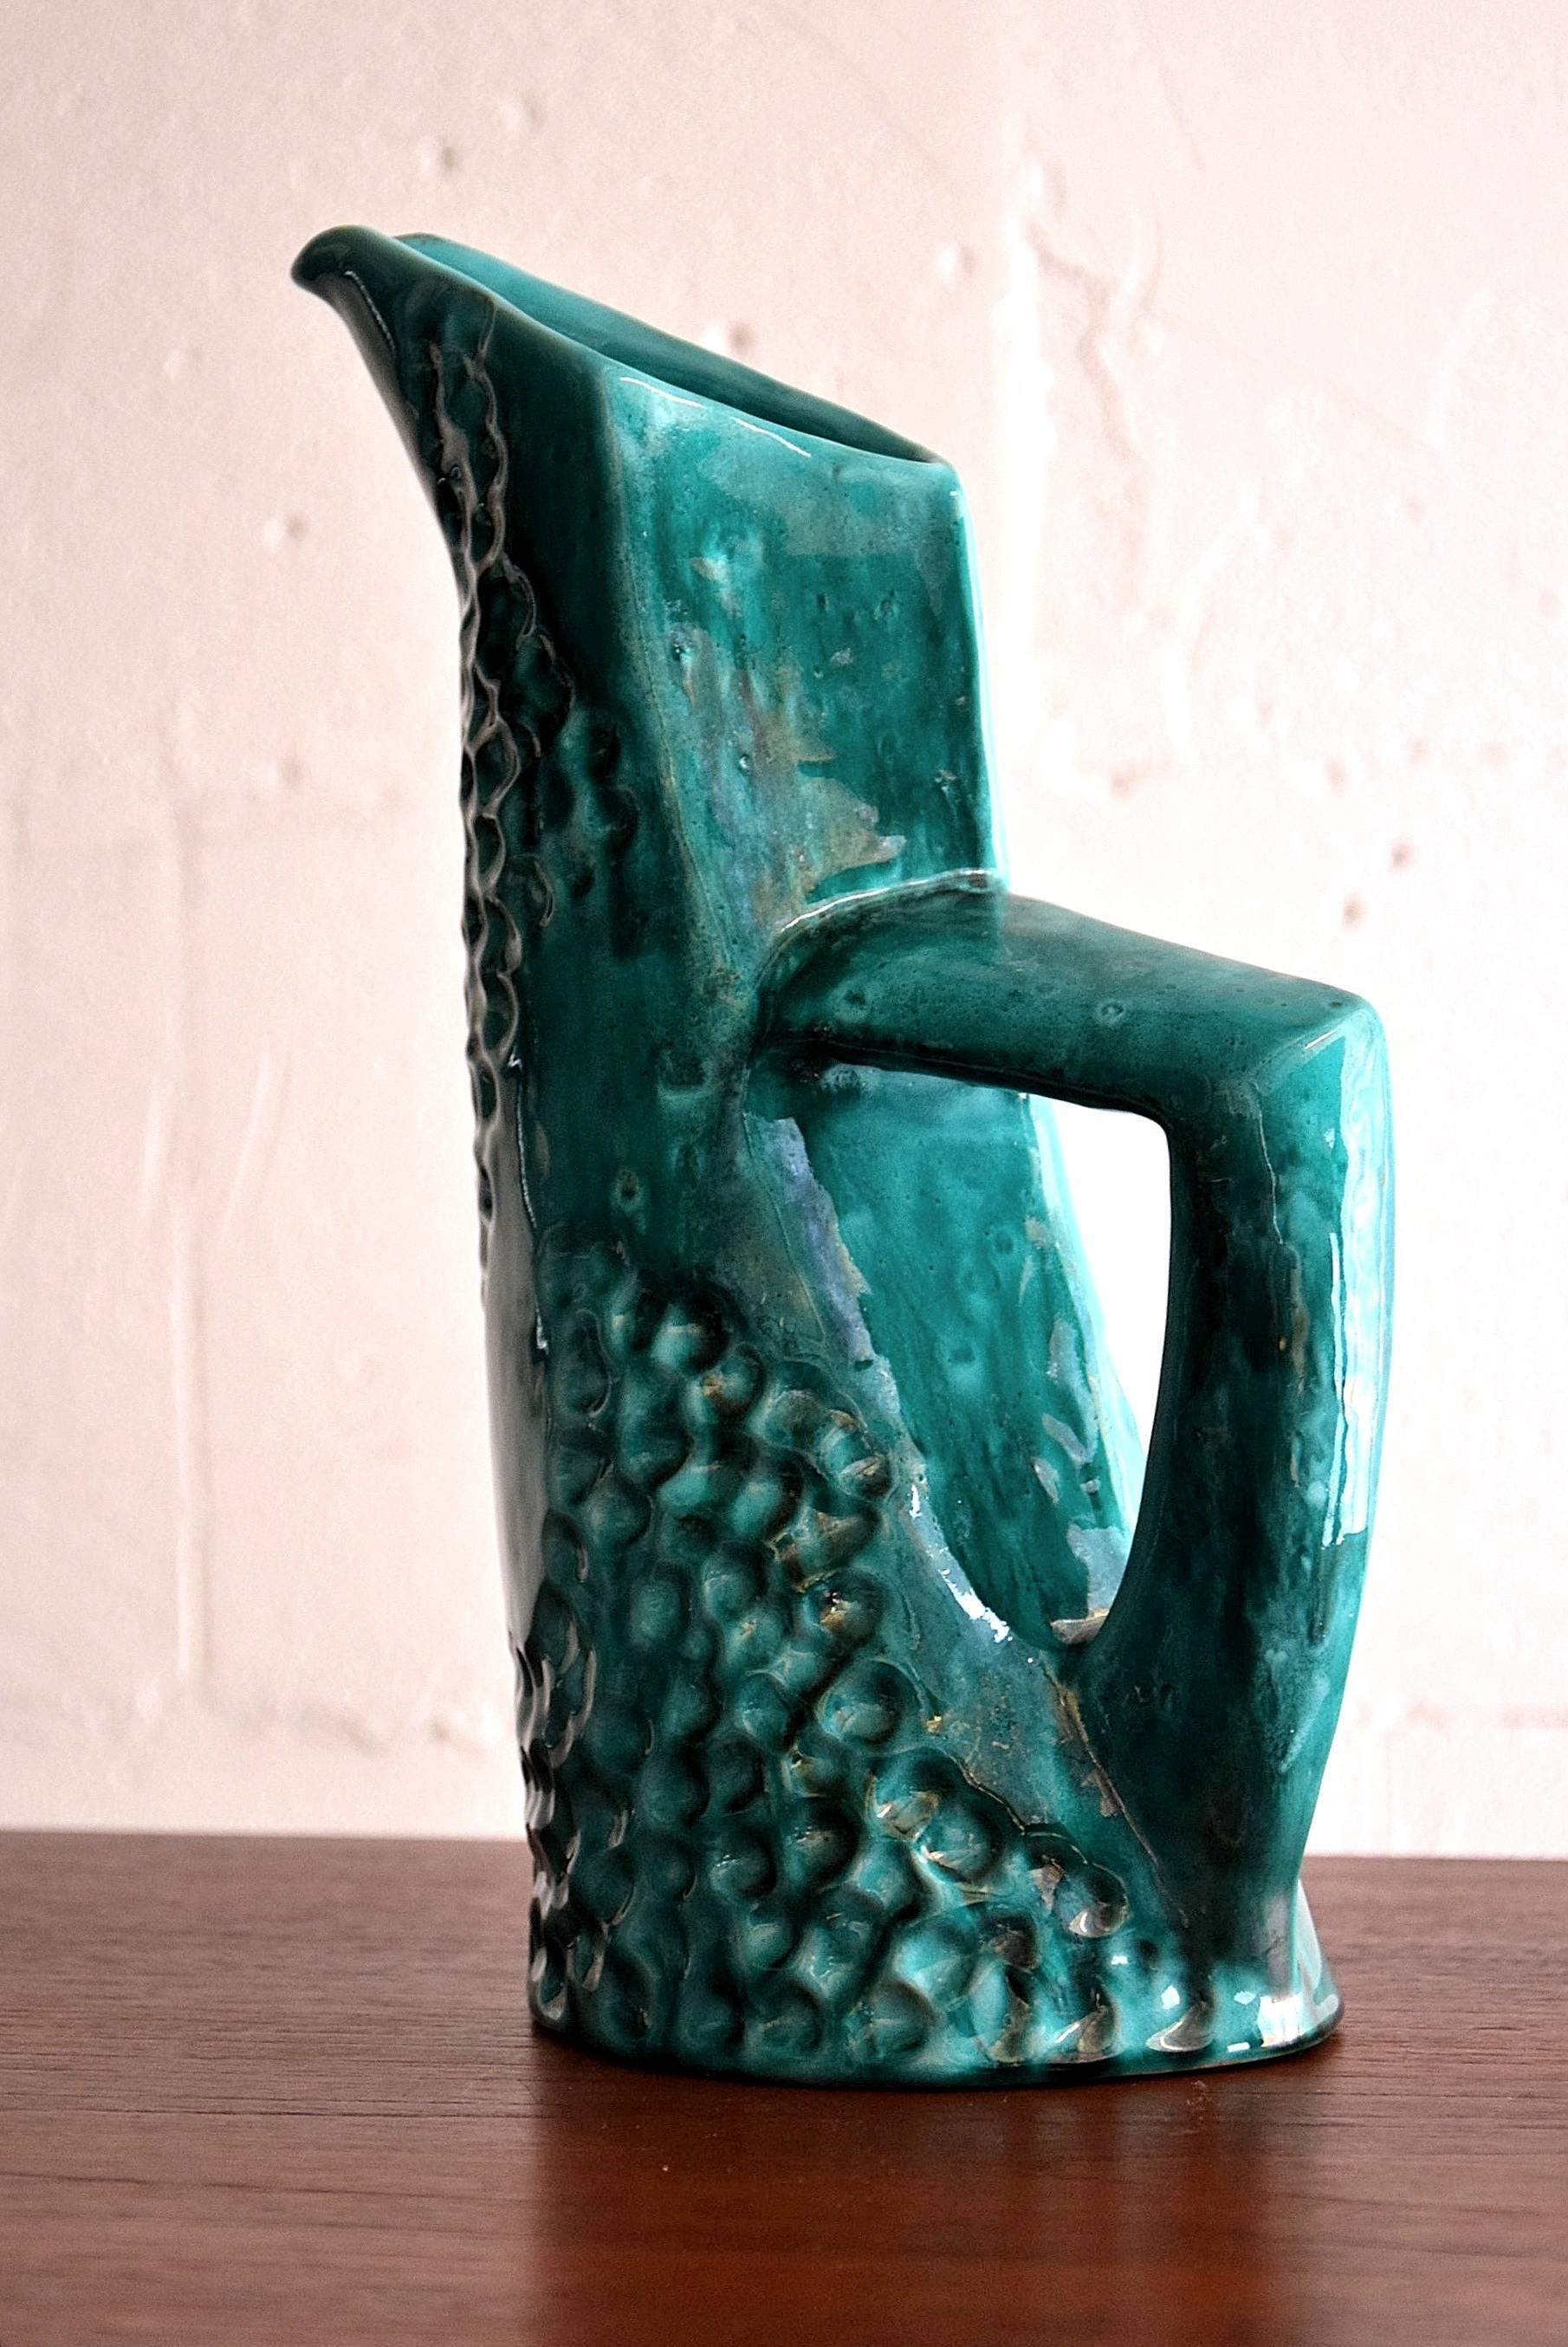 Futuristic shaped ceramic carafe in beautiful shades of sea green.

Produced by Pucci ceramics in a small town called Umbertide in the province of Perugia.

The whole set is in excellent condition.